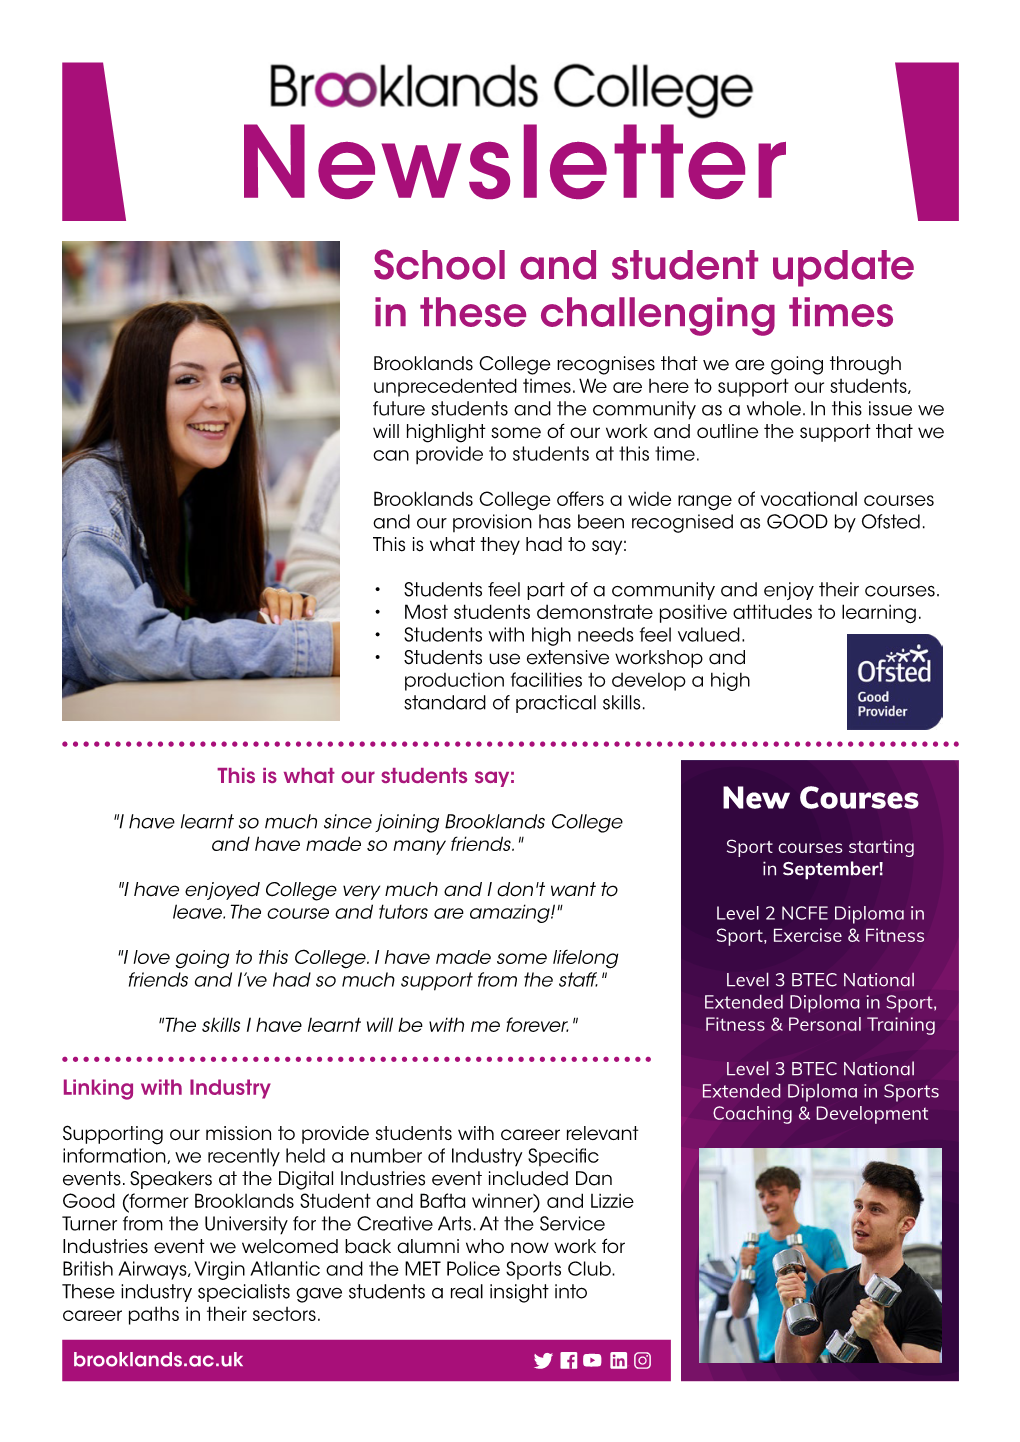 Newsletter School and Student Update in These Challenging Times